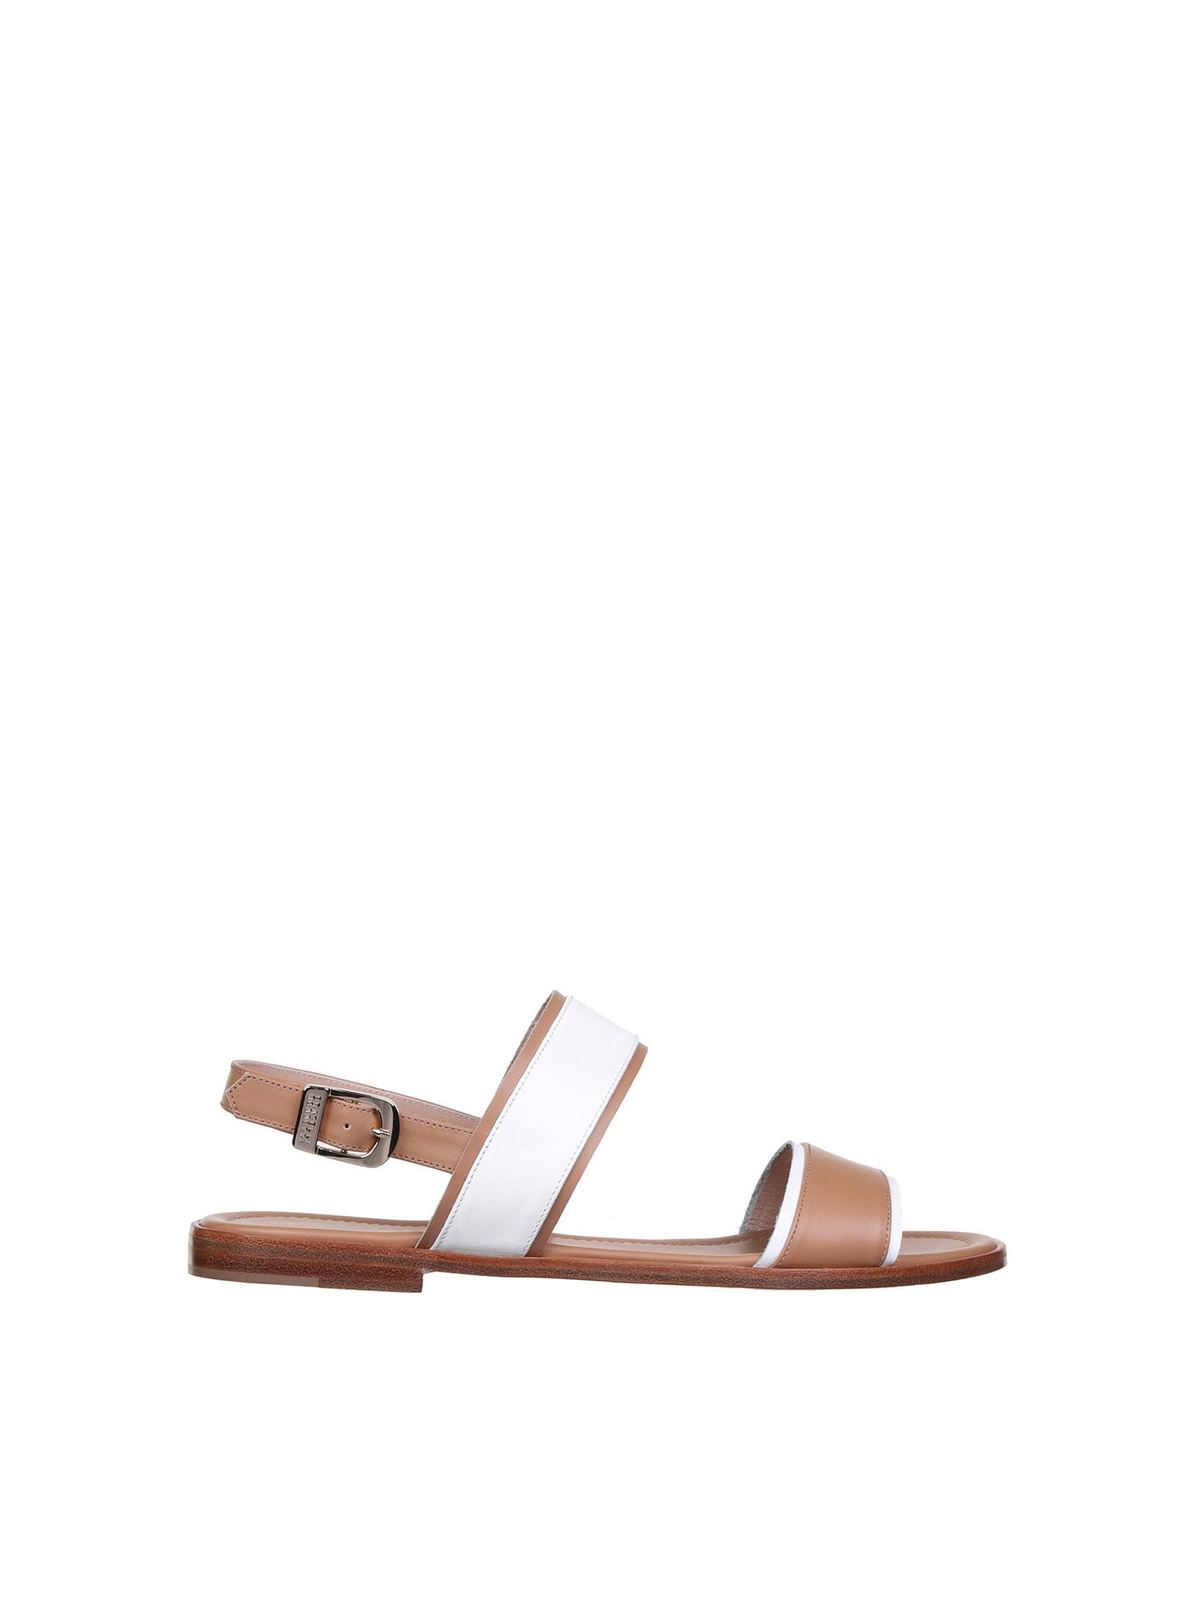 FRATELLI ROSSETTI TWO-TONE SANDALS IN BEIGE AND WHITE